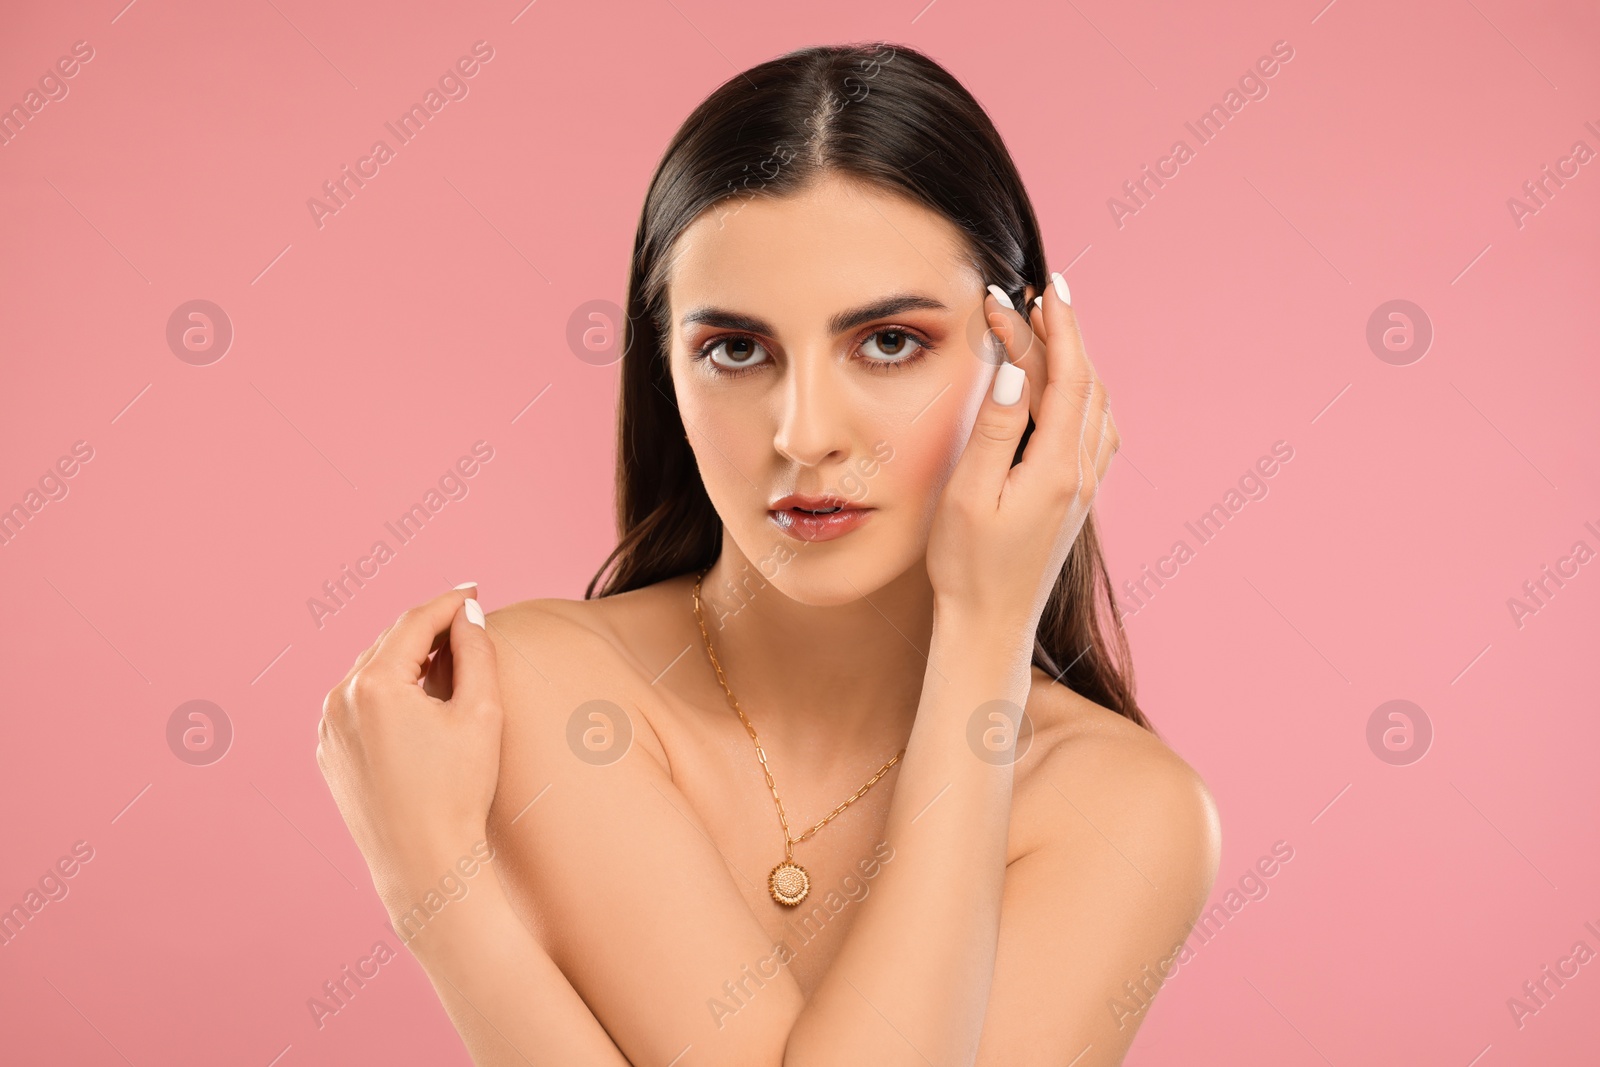 Photo of Beautiful woman with elegant necklace on pink background